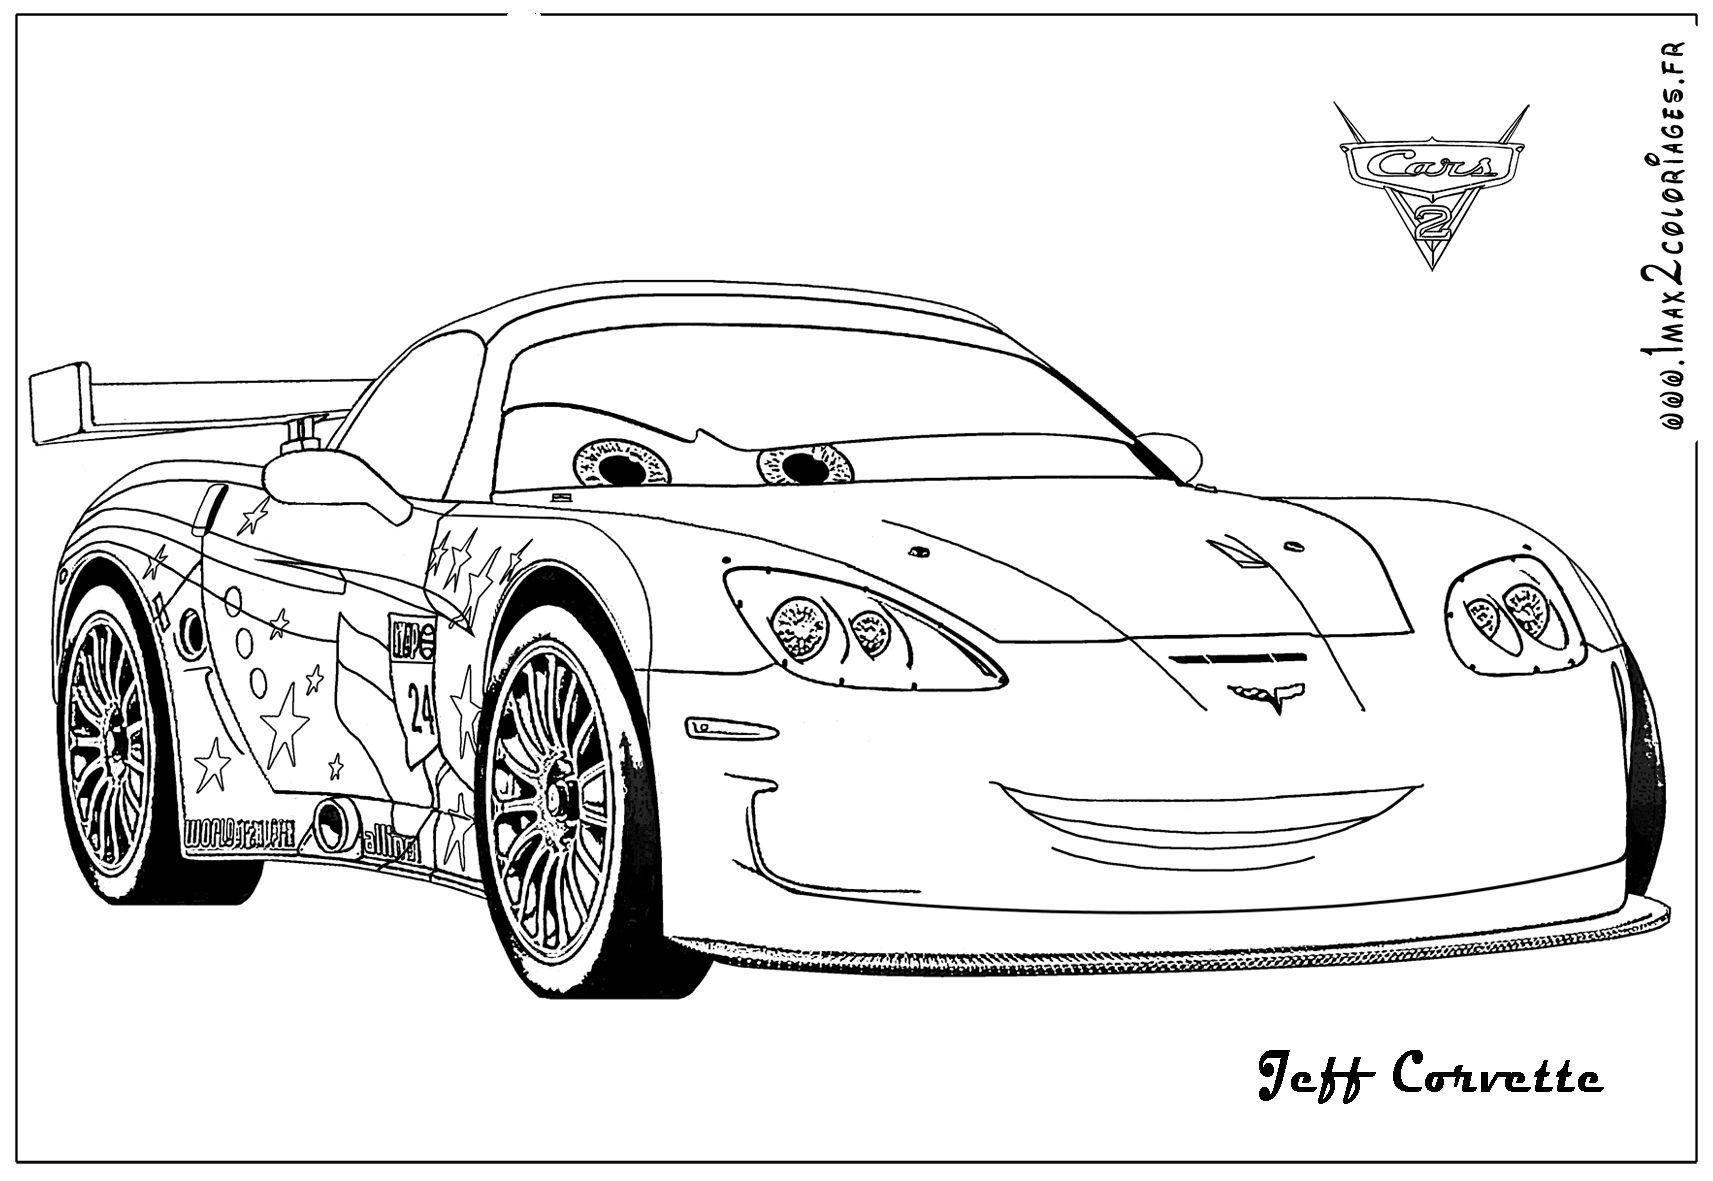 cars 2 pictures to print cars 2 jeff corvette coloring page cars coloring pages print pictures to 2 cars 